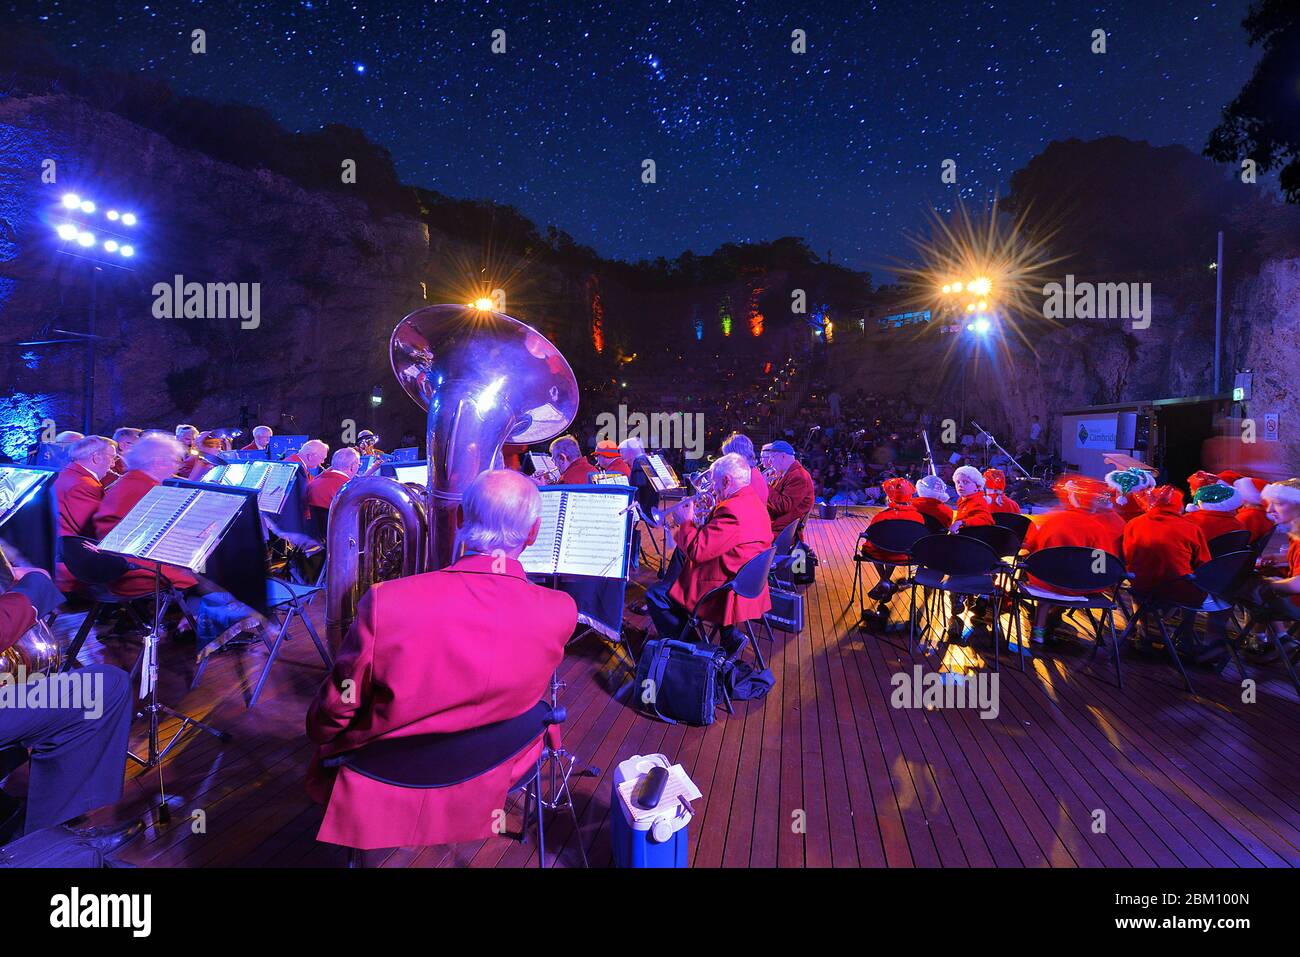 A brass band playing a concert at an outdoor amphitheatre under the stars. Point of view is from the back of the stage looking towards the audience. Stock Photo